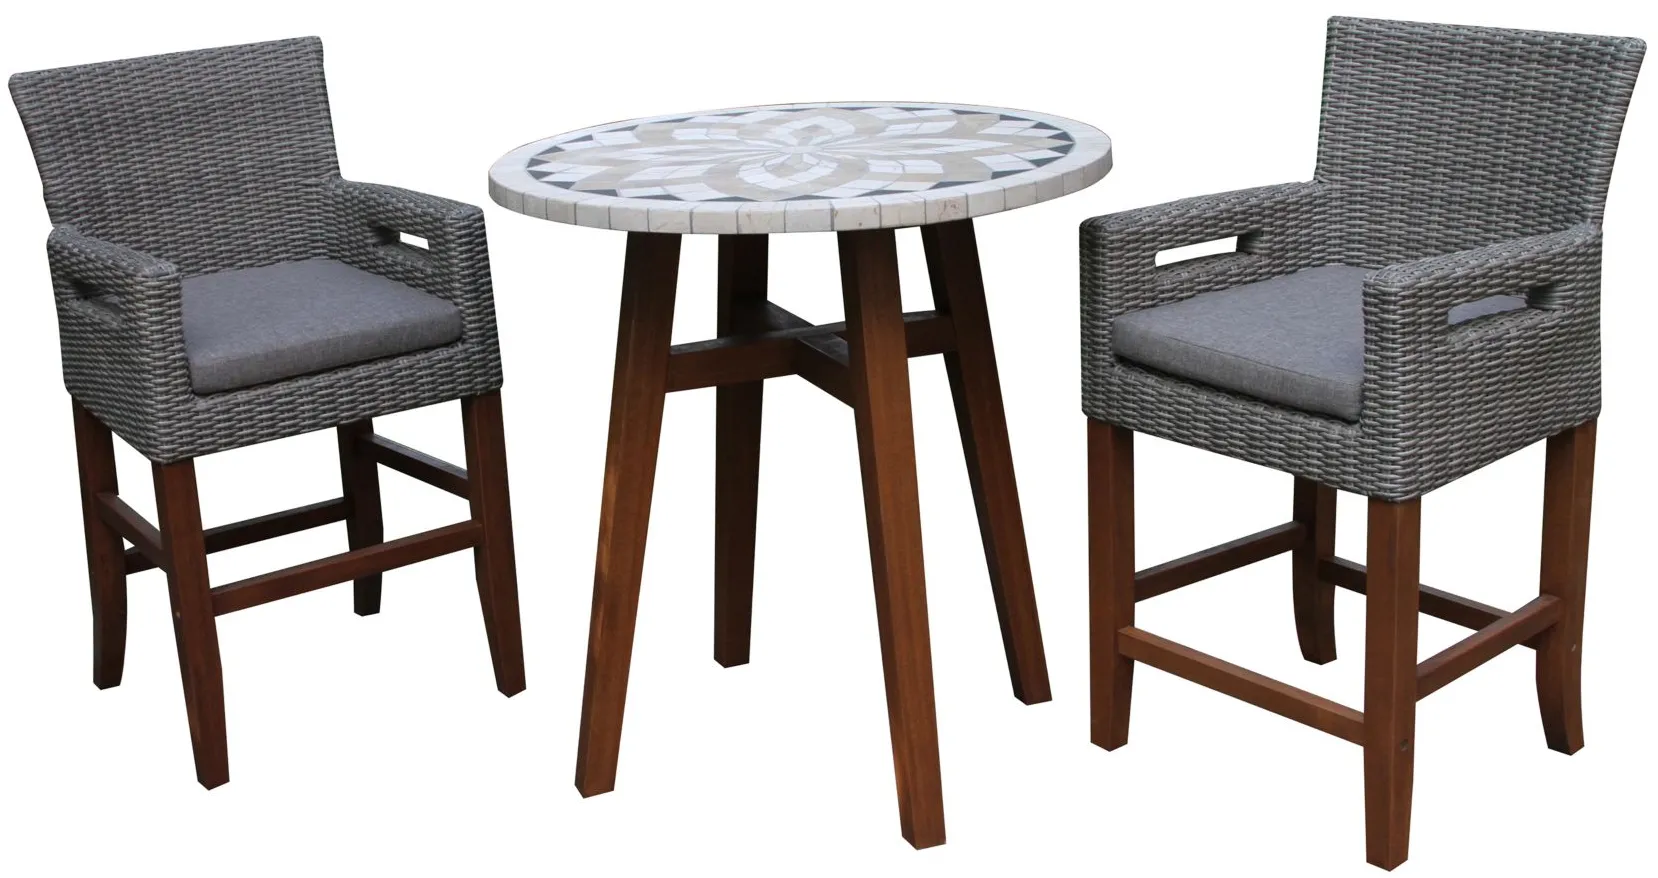 Bassey 3 pc. Counter Height Bistro Set in Multi by Outdoor Interiors